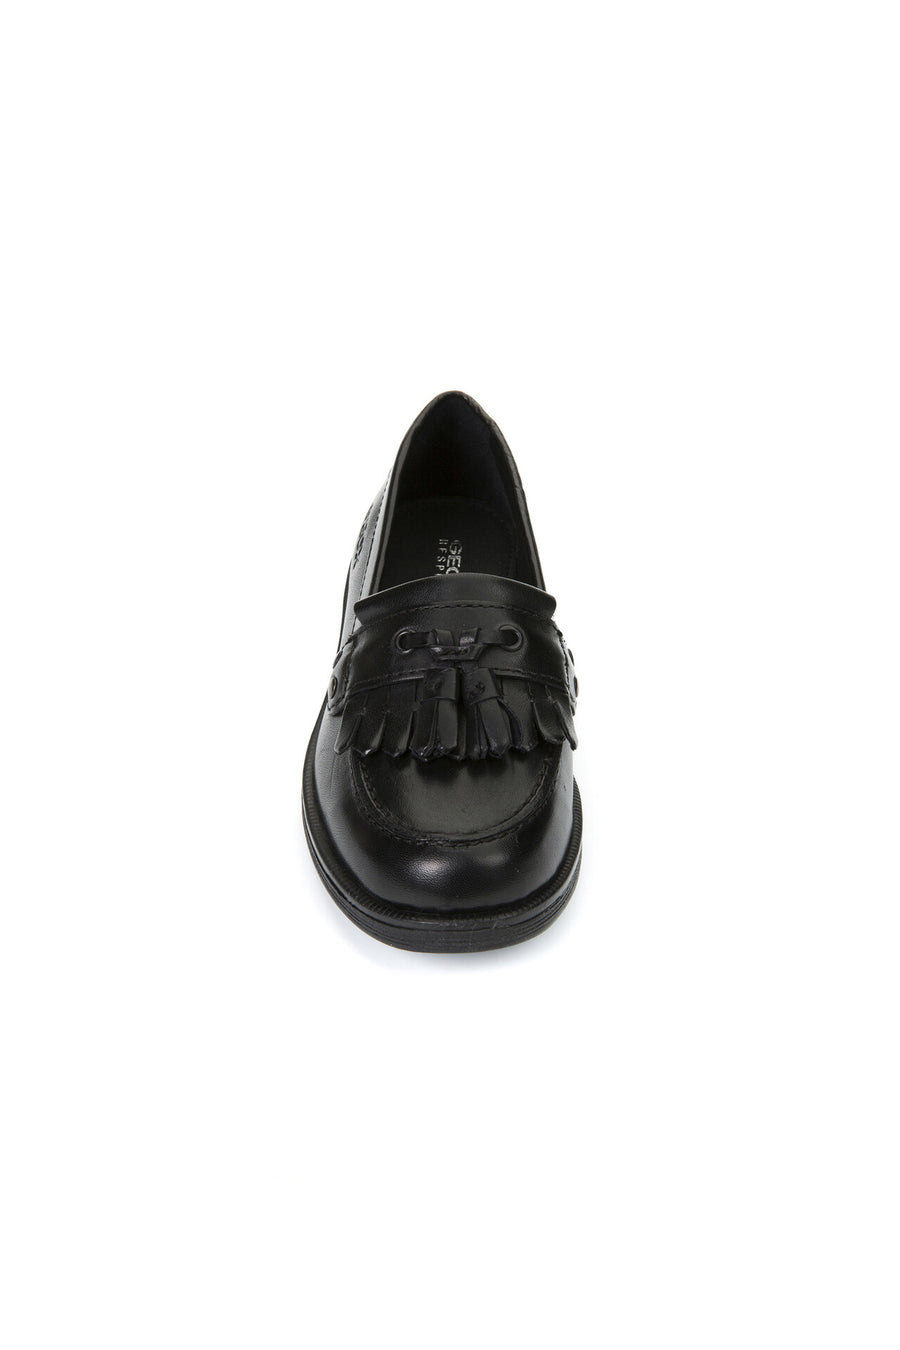 Geox Loafer|Agata|Black Leather